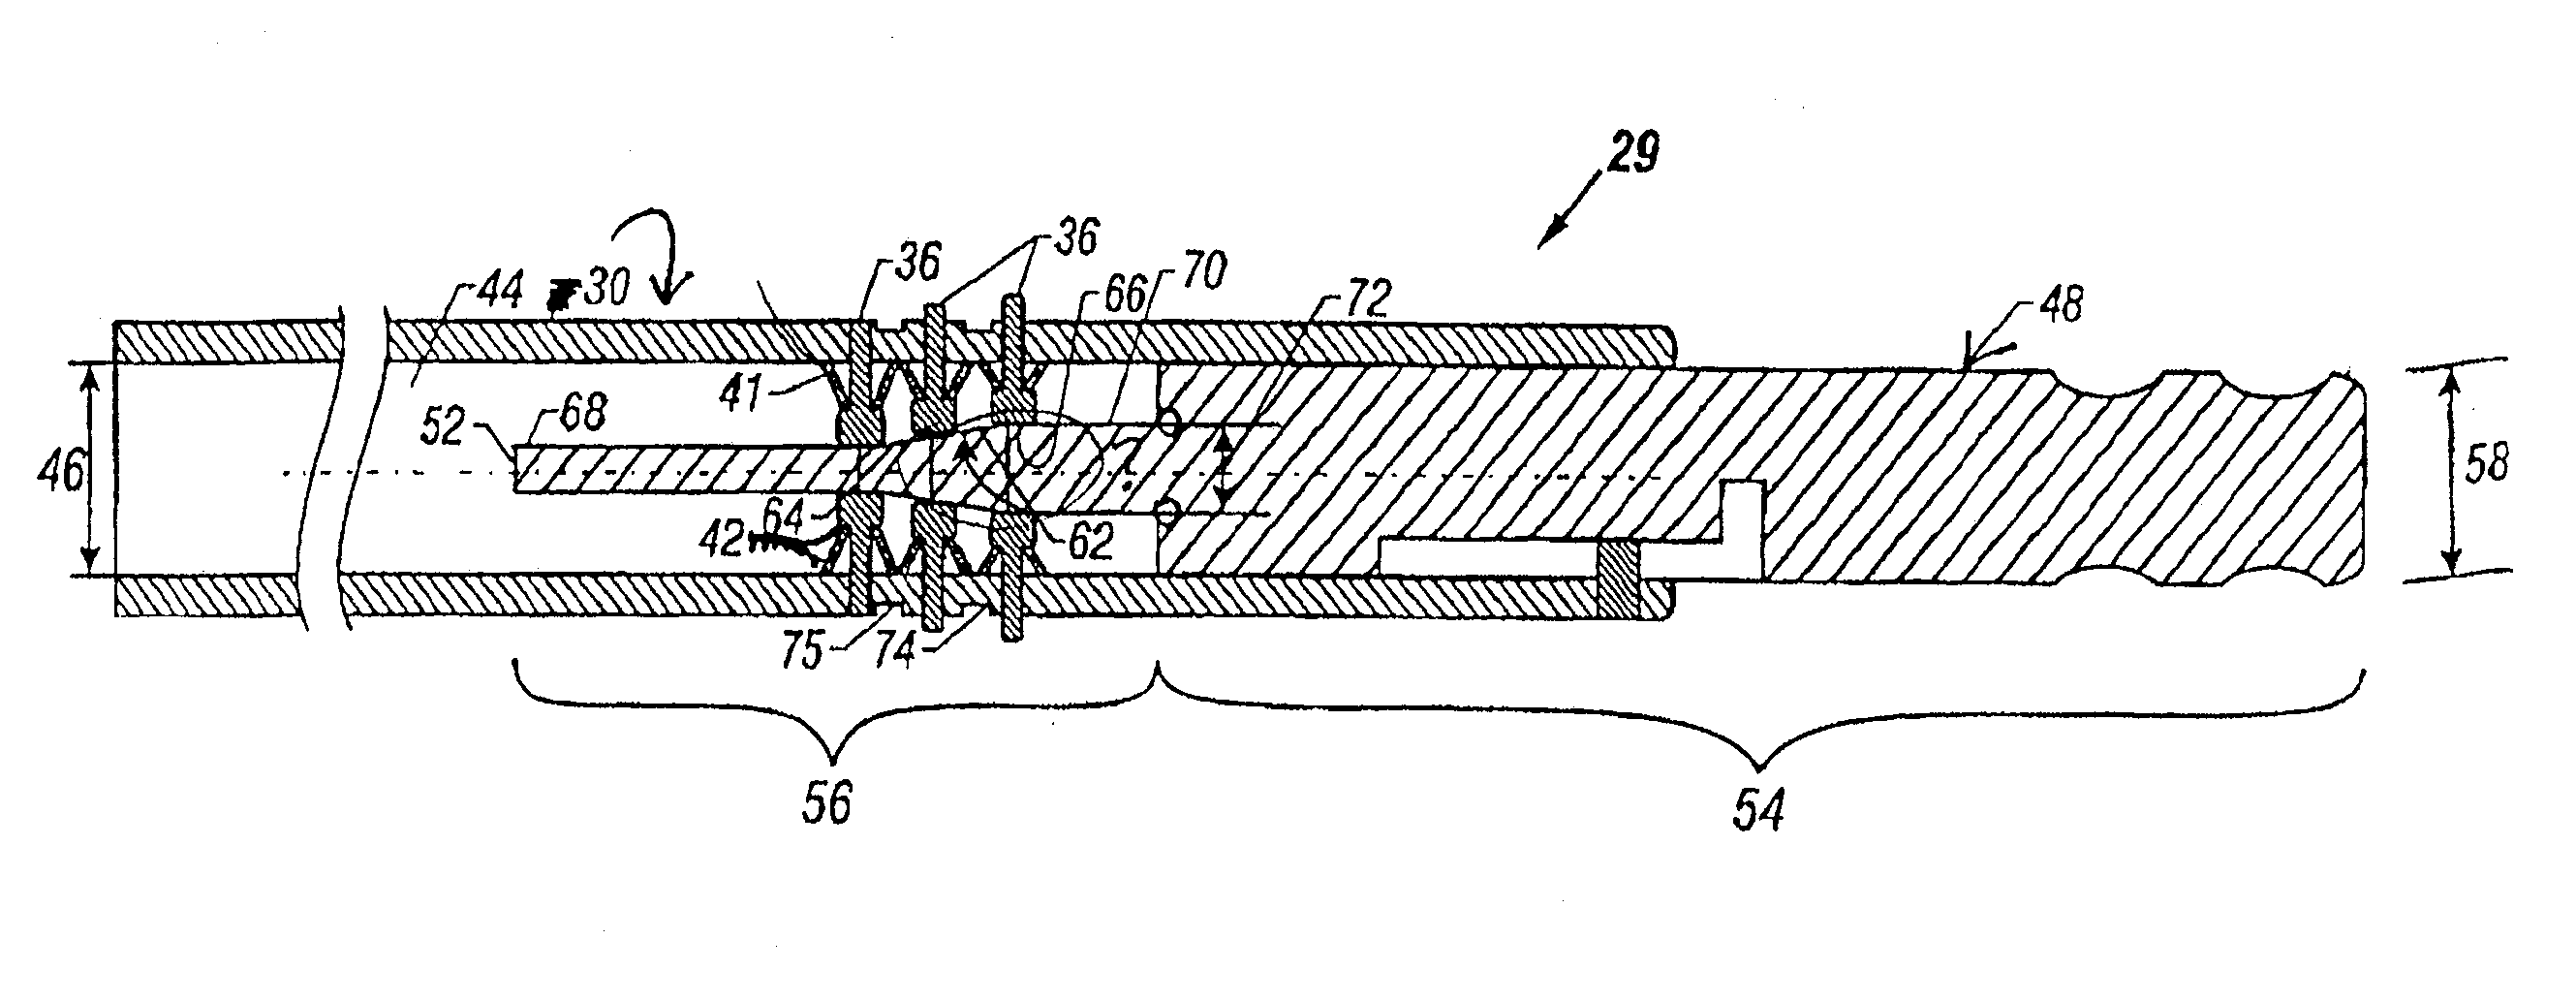 Method and Apparatus for Making a Braided Stent with Spherically Ended Wires